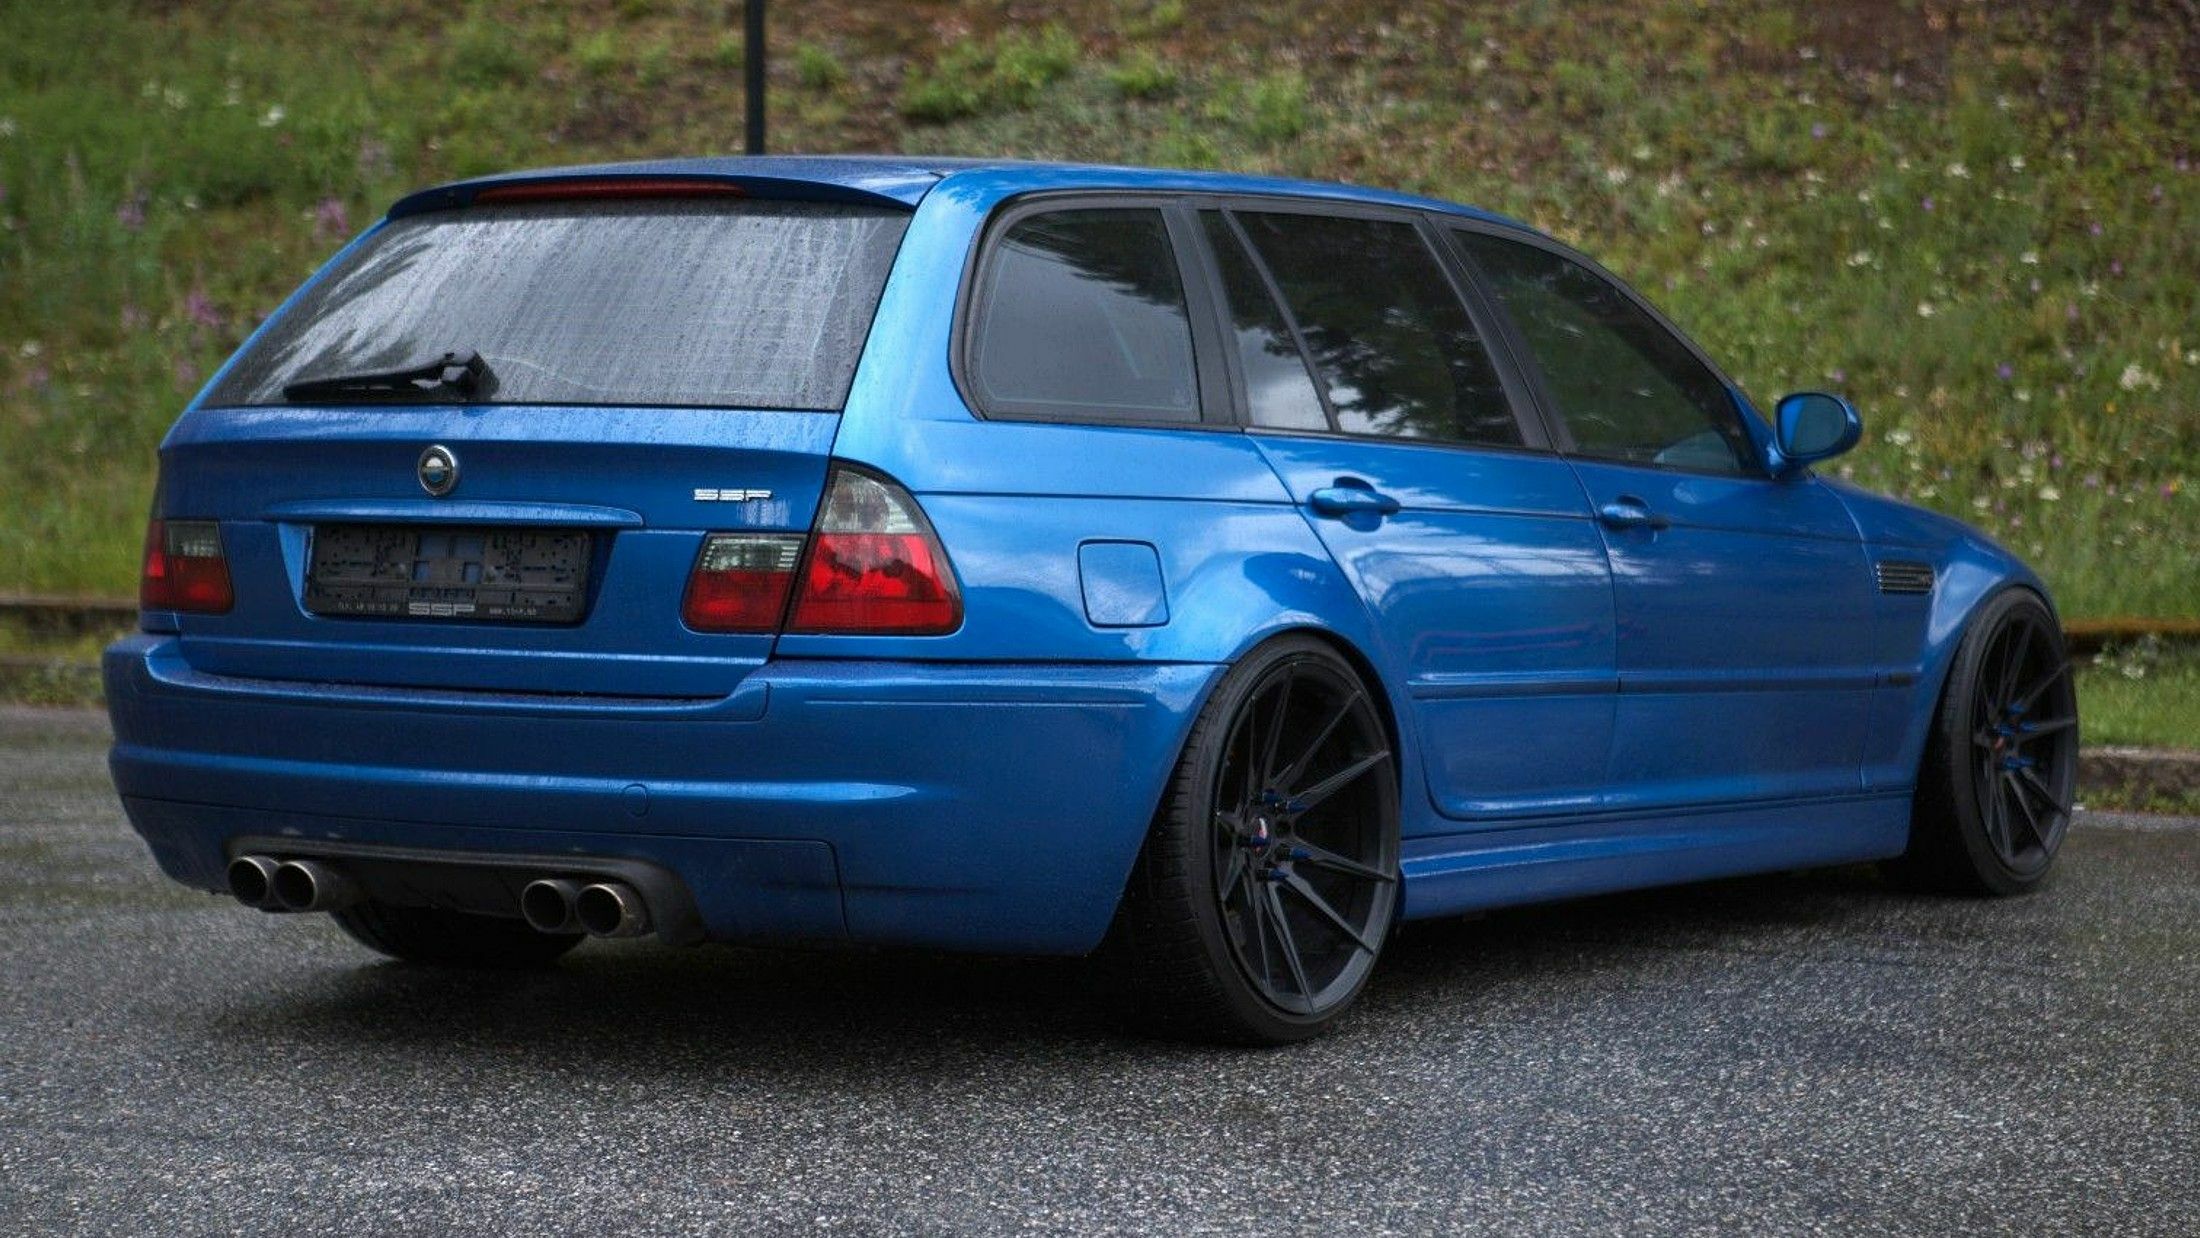 The One-Off BMW E46 M3 Touring